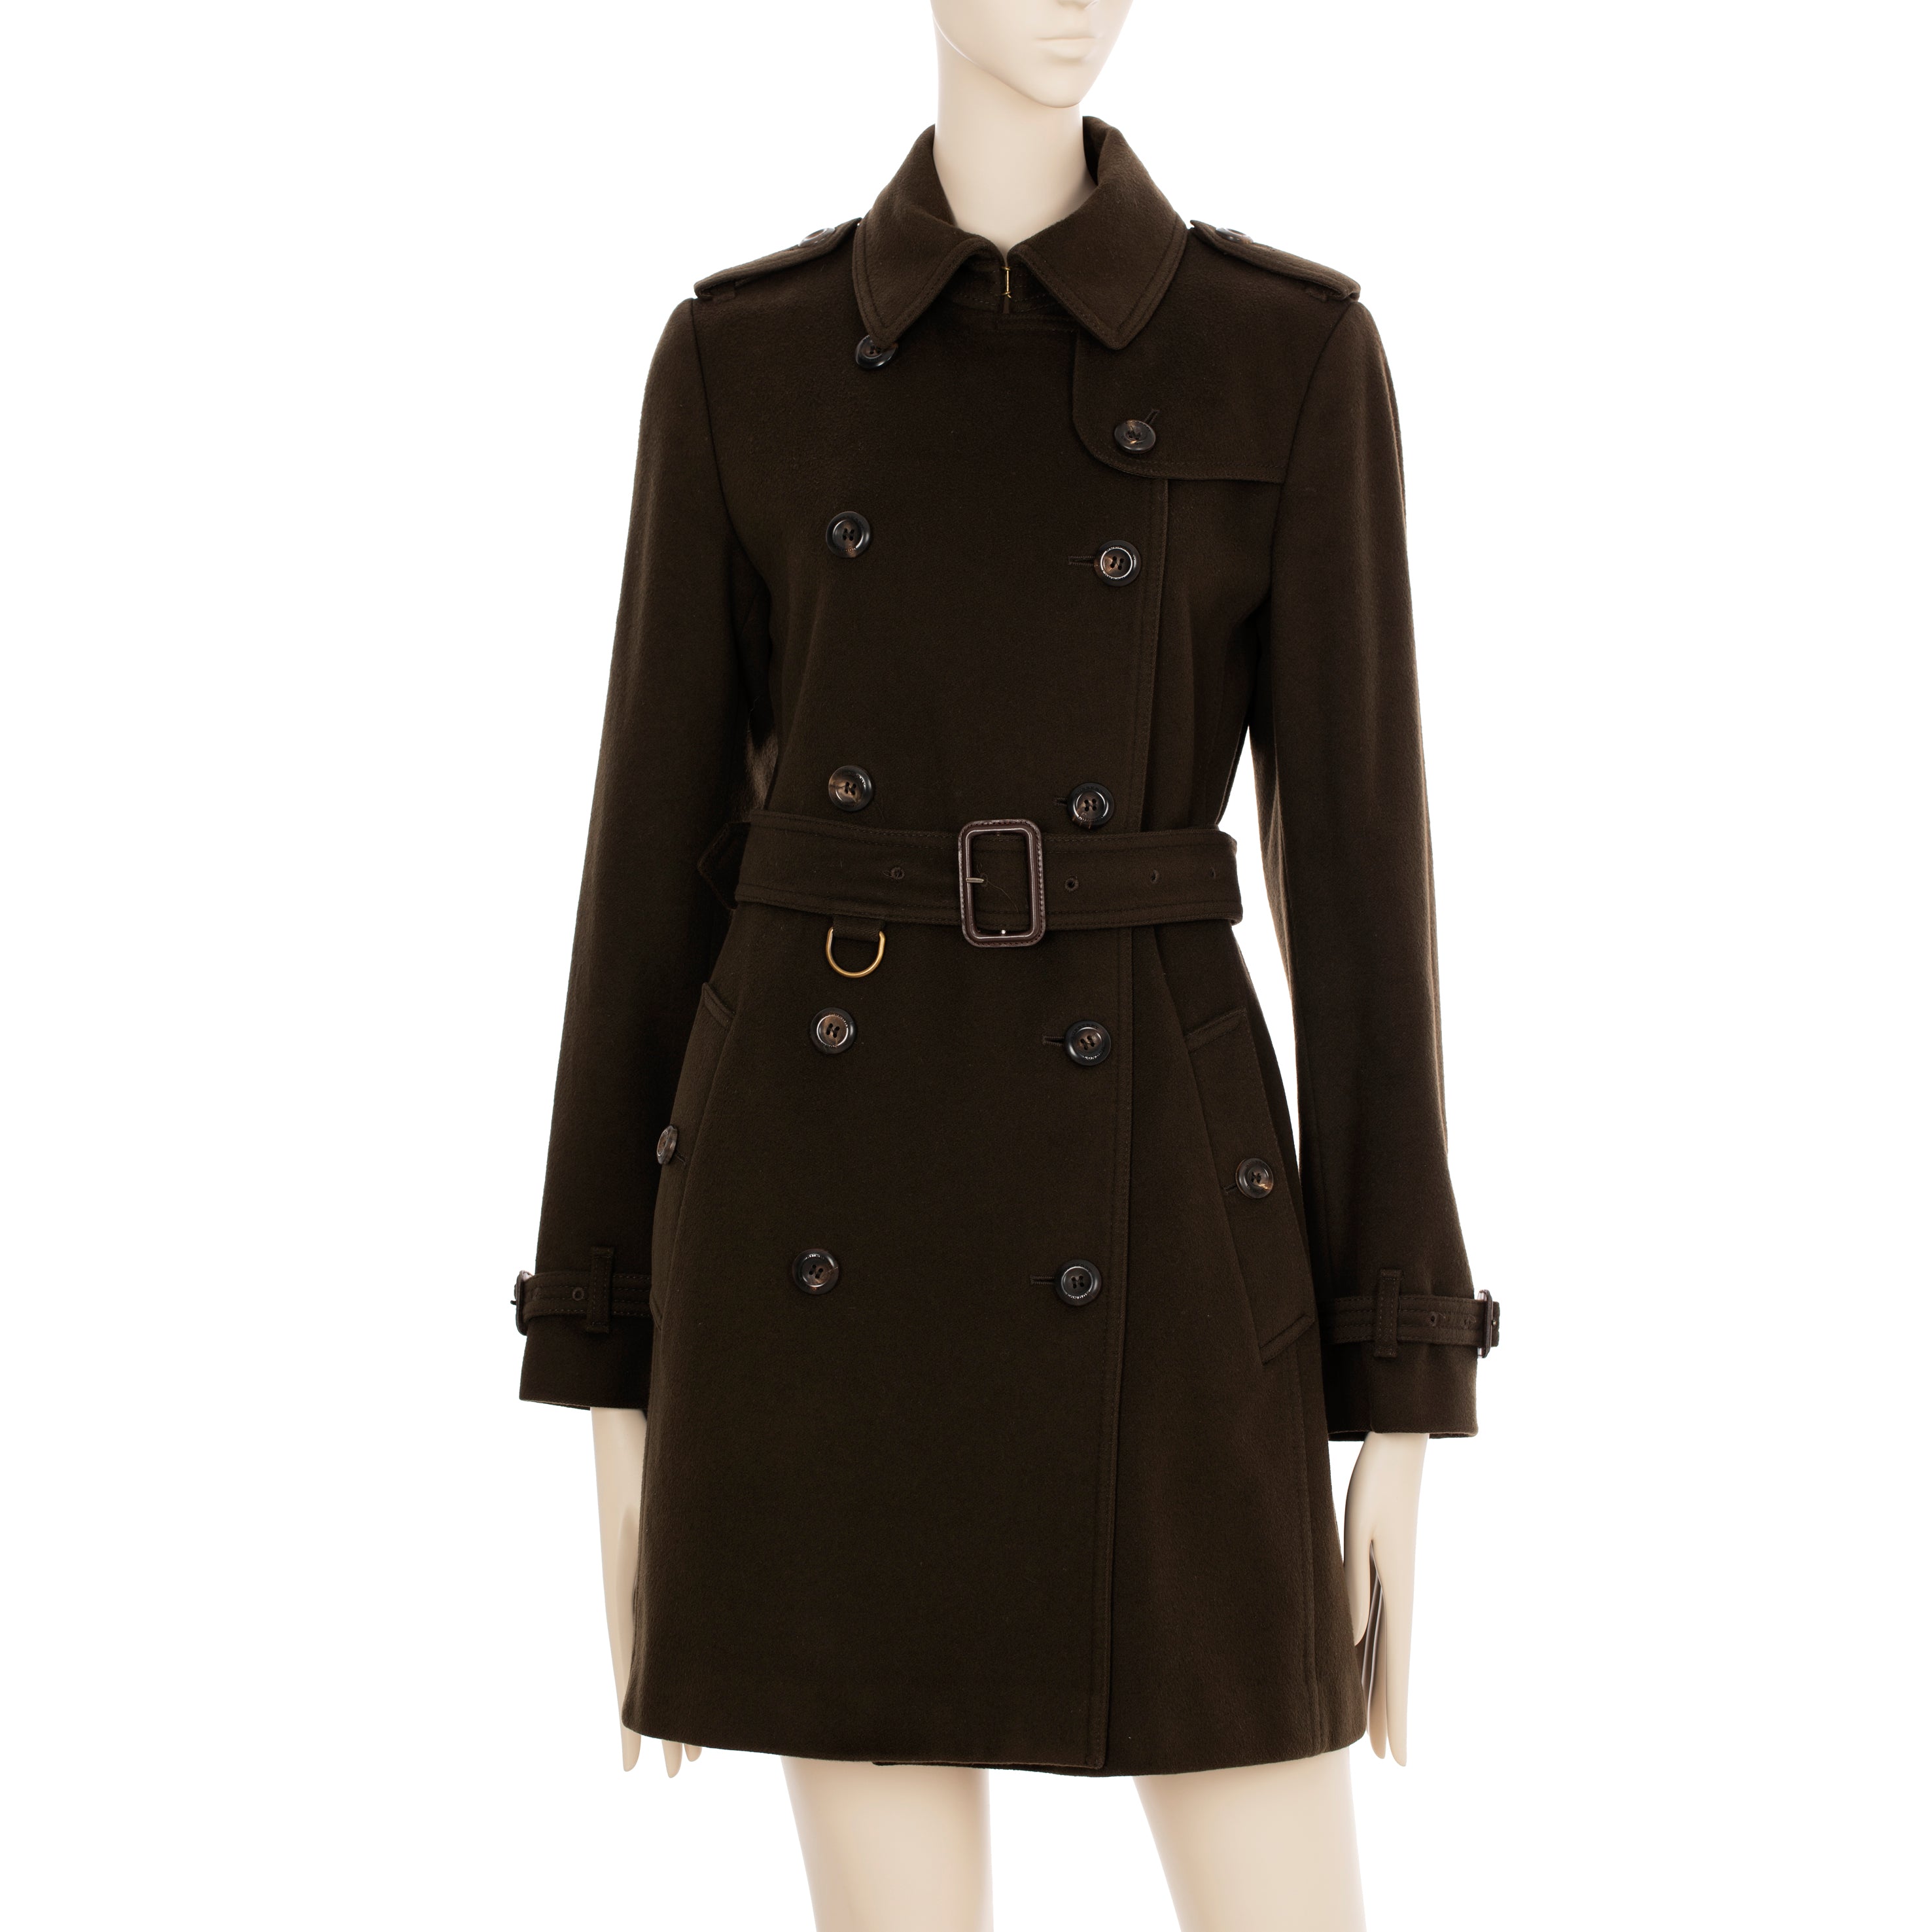 Burberry Chocolate Wool & Cashmere Trench Coat 38 IT